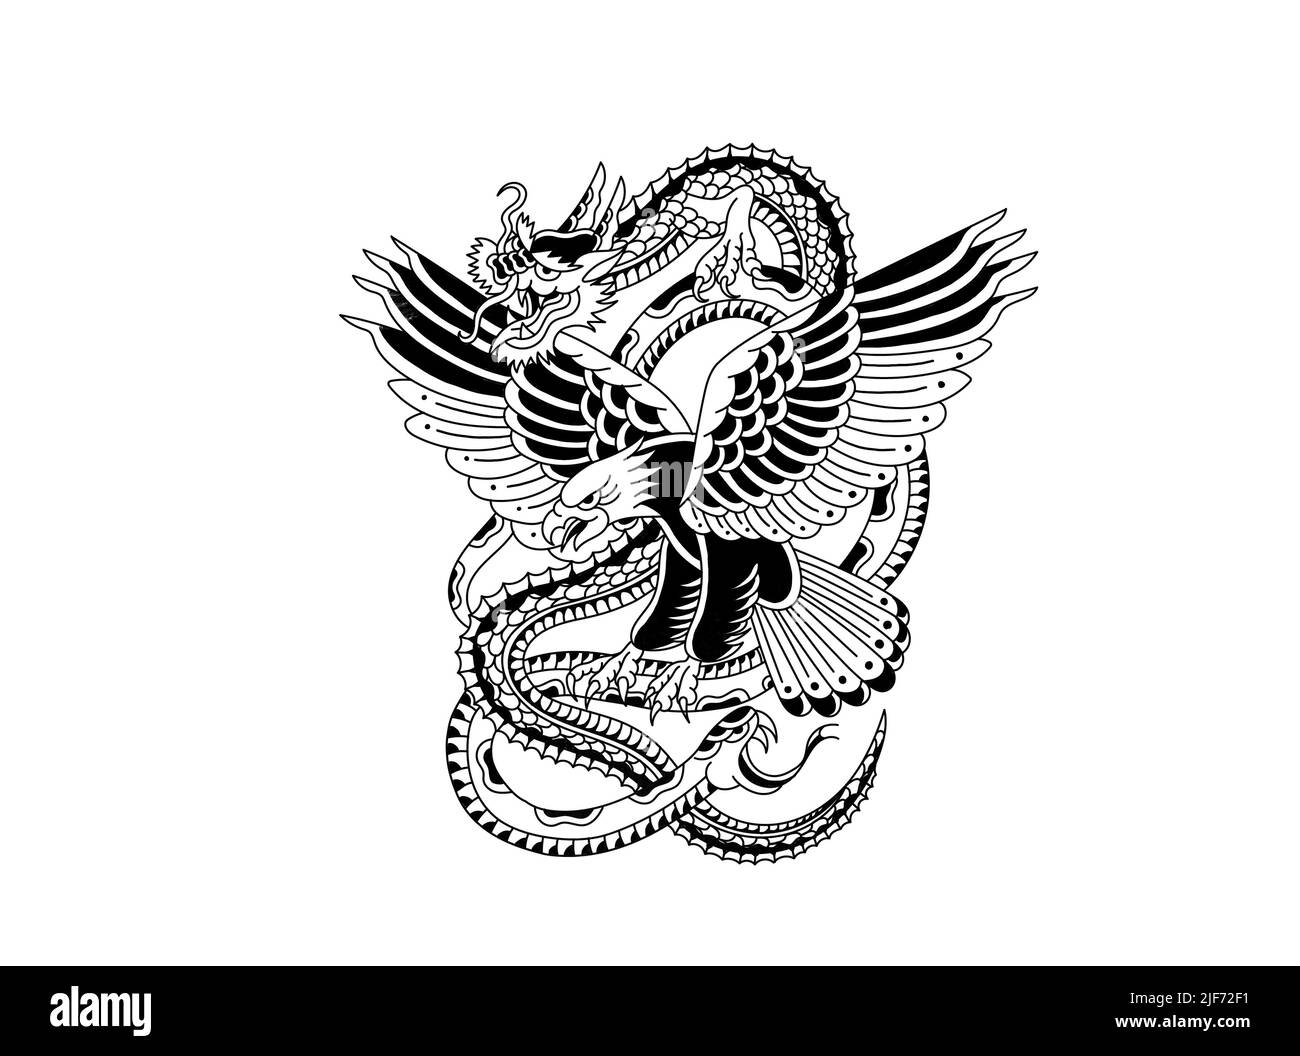 Old school tattoo style graphic design drawing battle snake eagle dragon Stock Photo